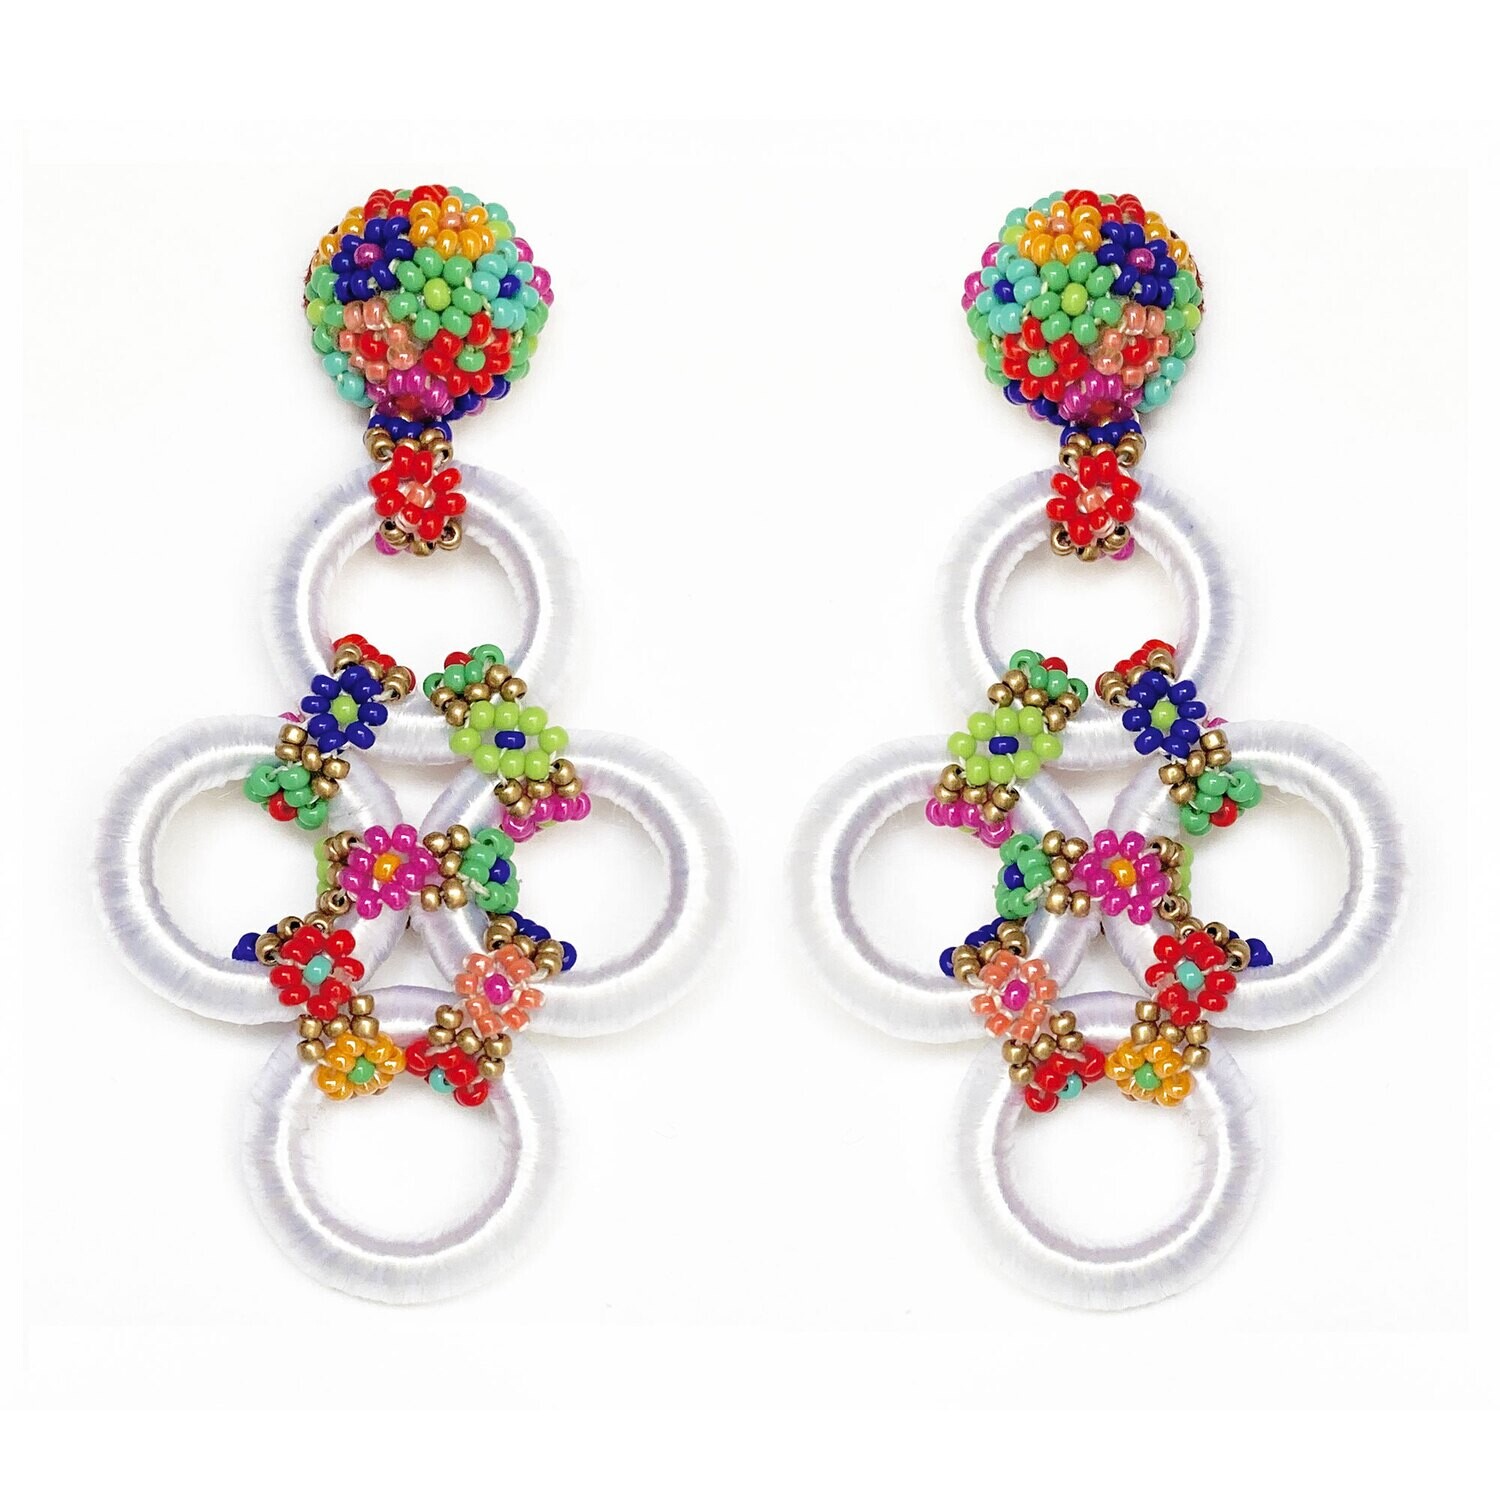 Suzanna Dai Marguerite Woven Link Beaded Earrings